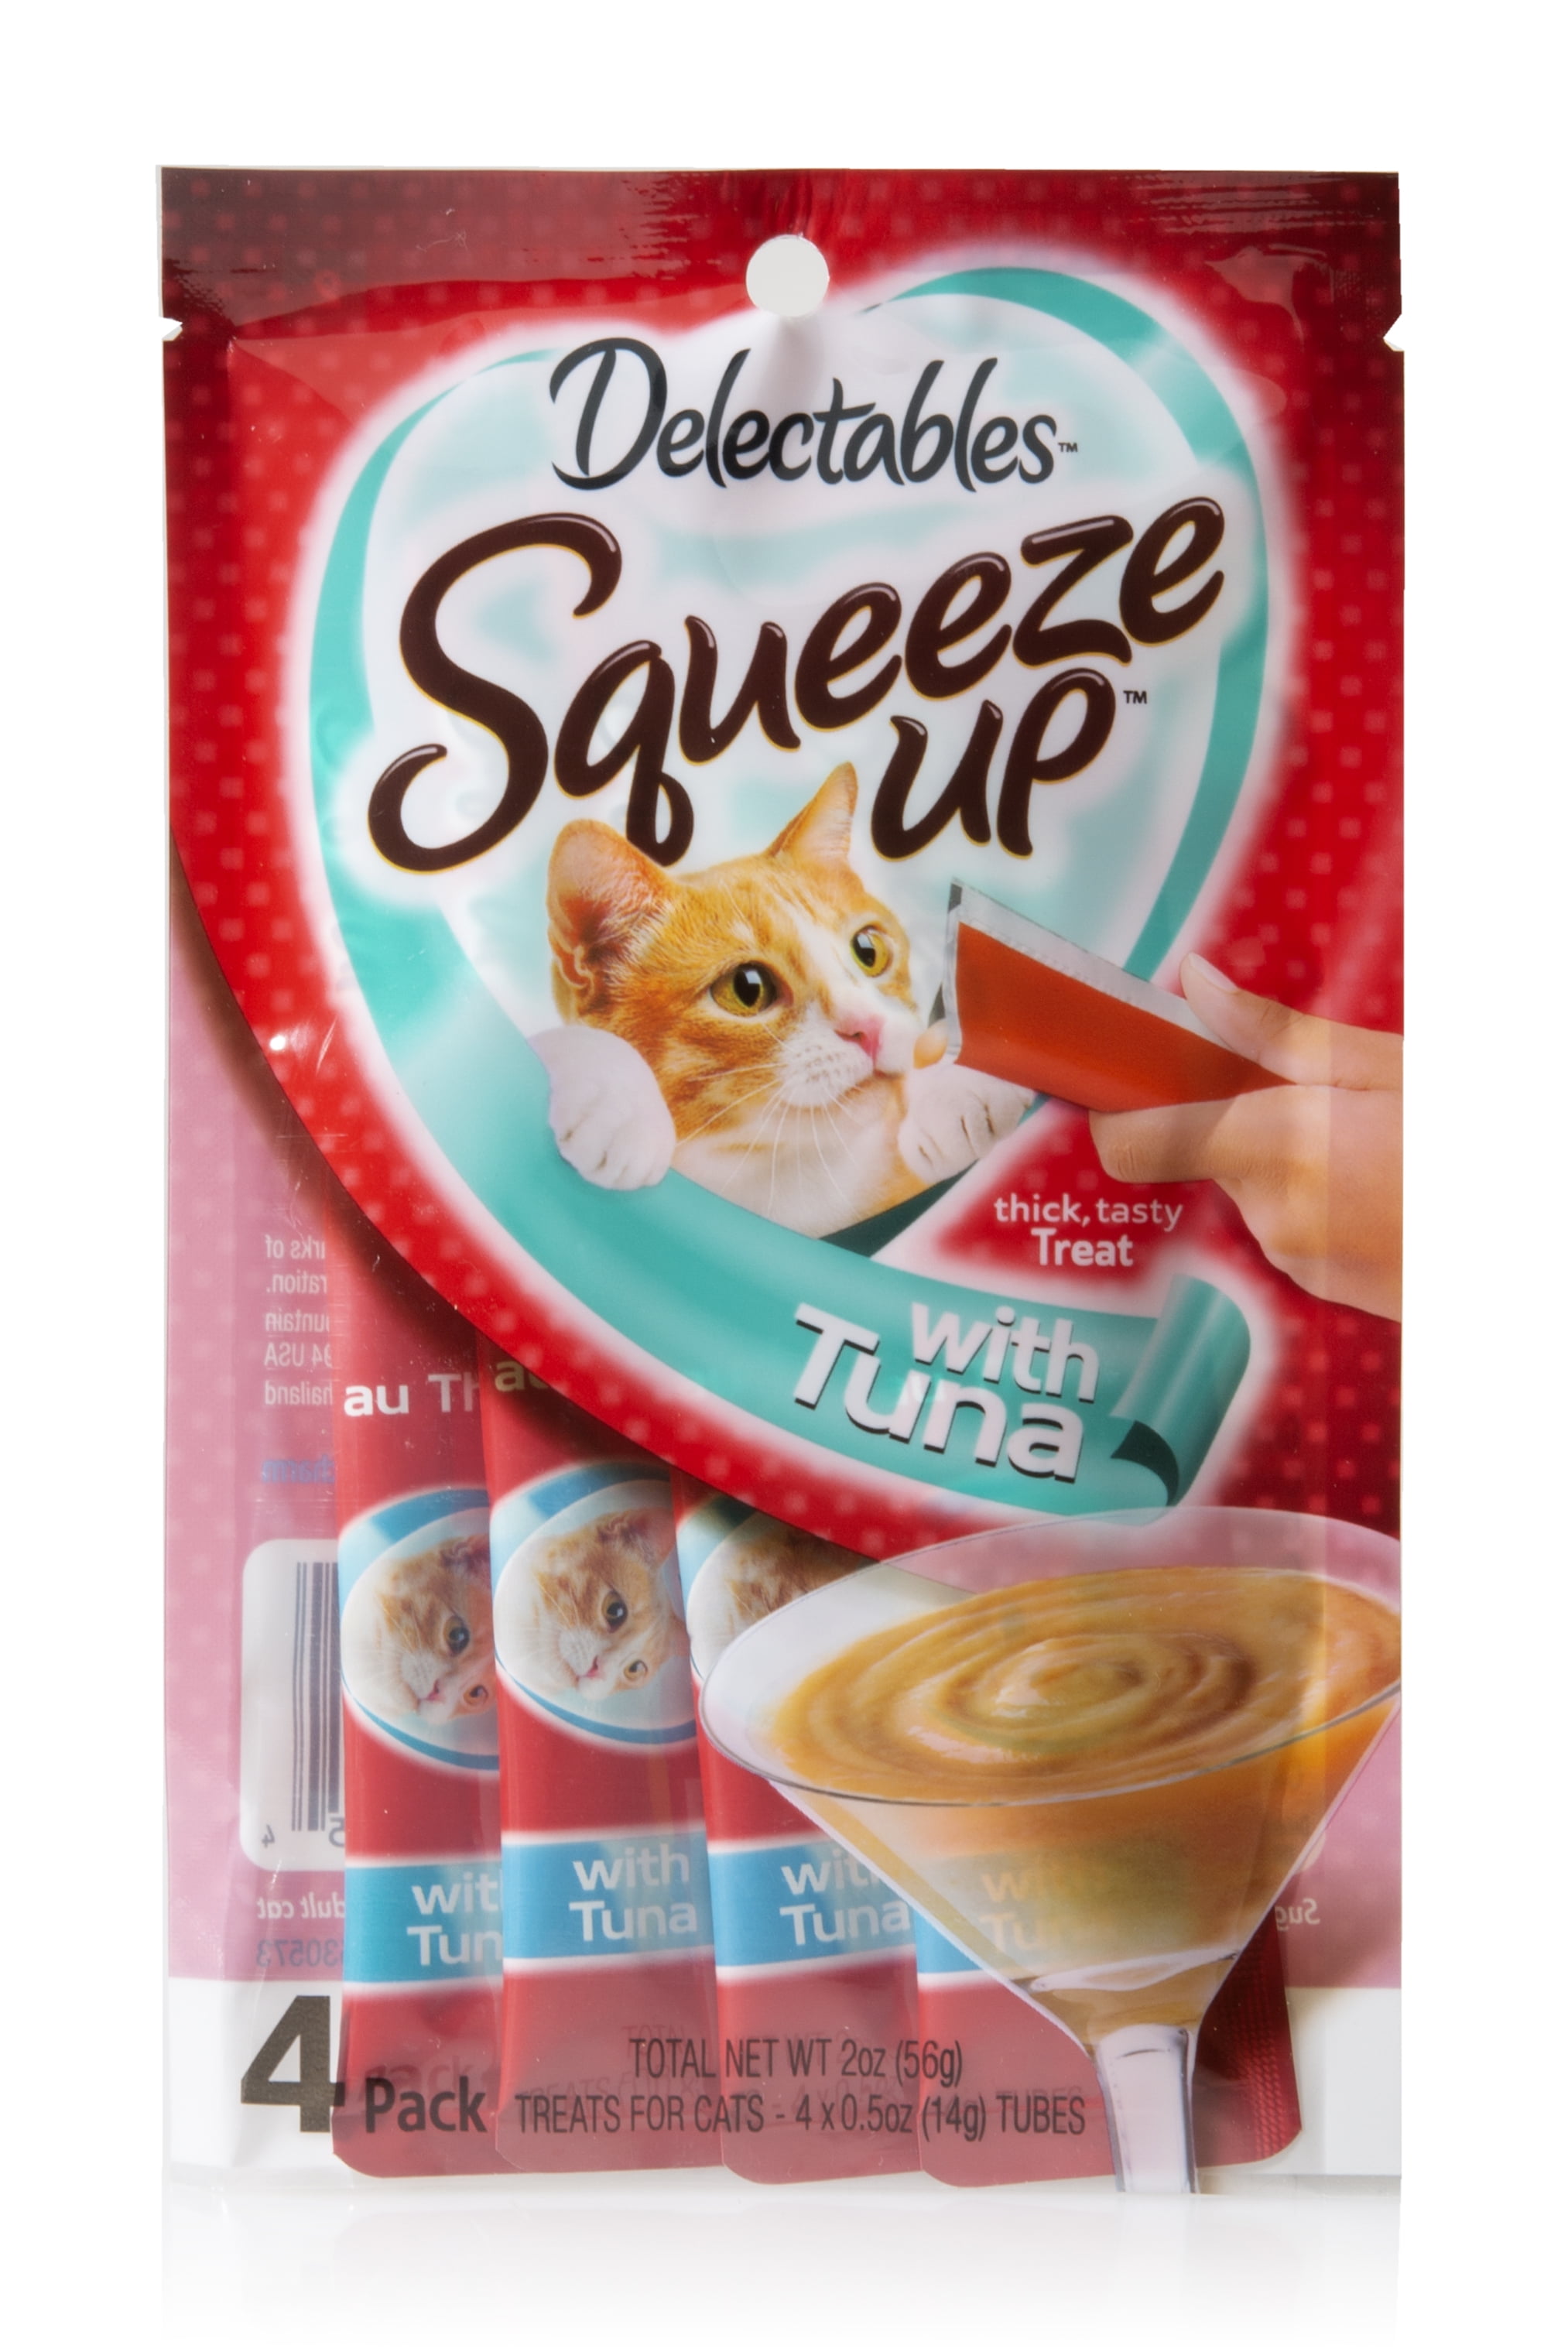 (16 pack) Delectables Squeeze Up Cat Treats Tuna, 4 Count